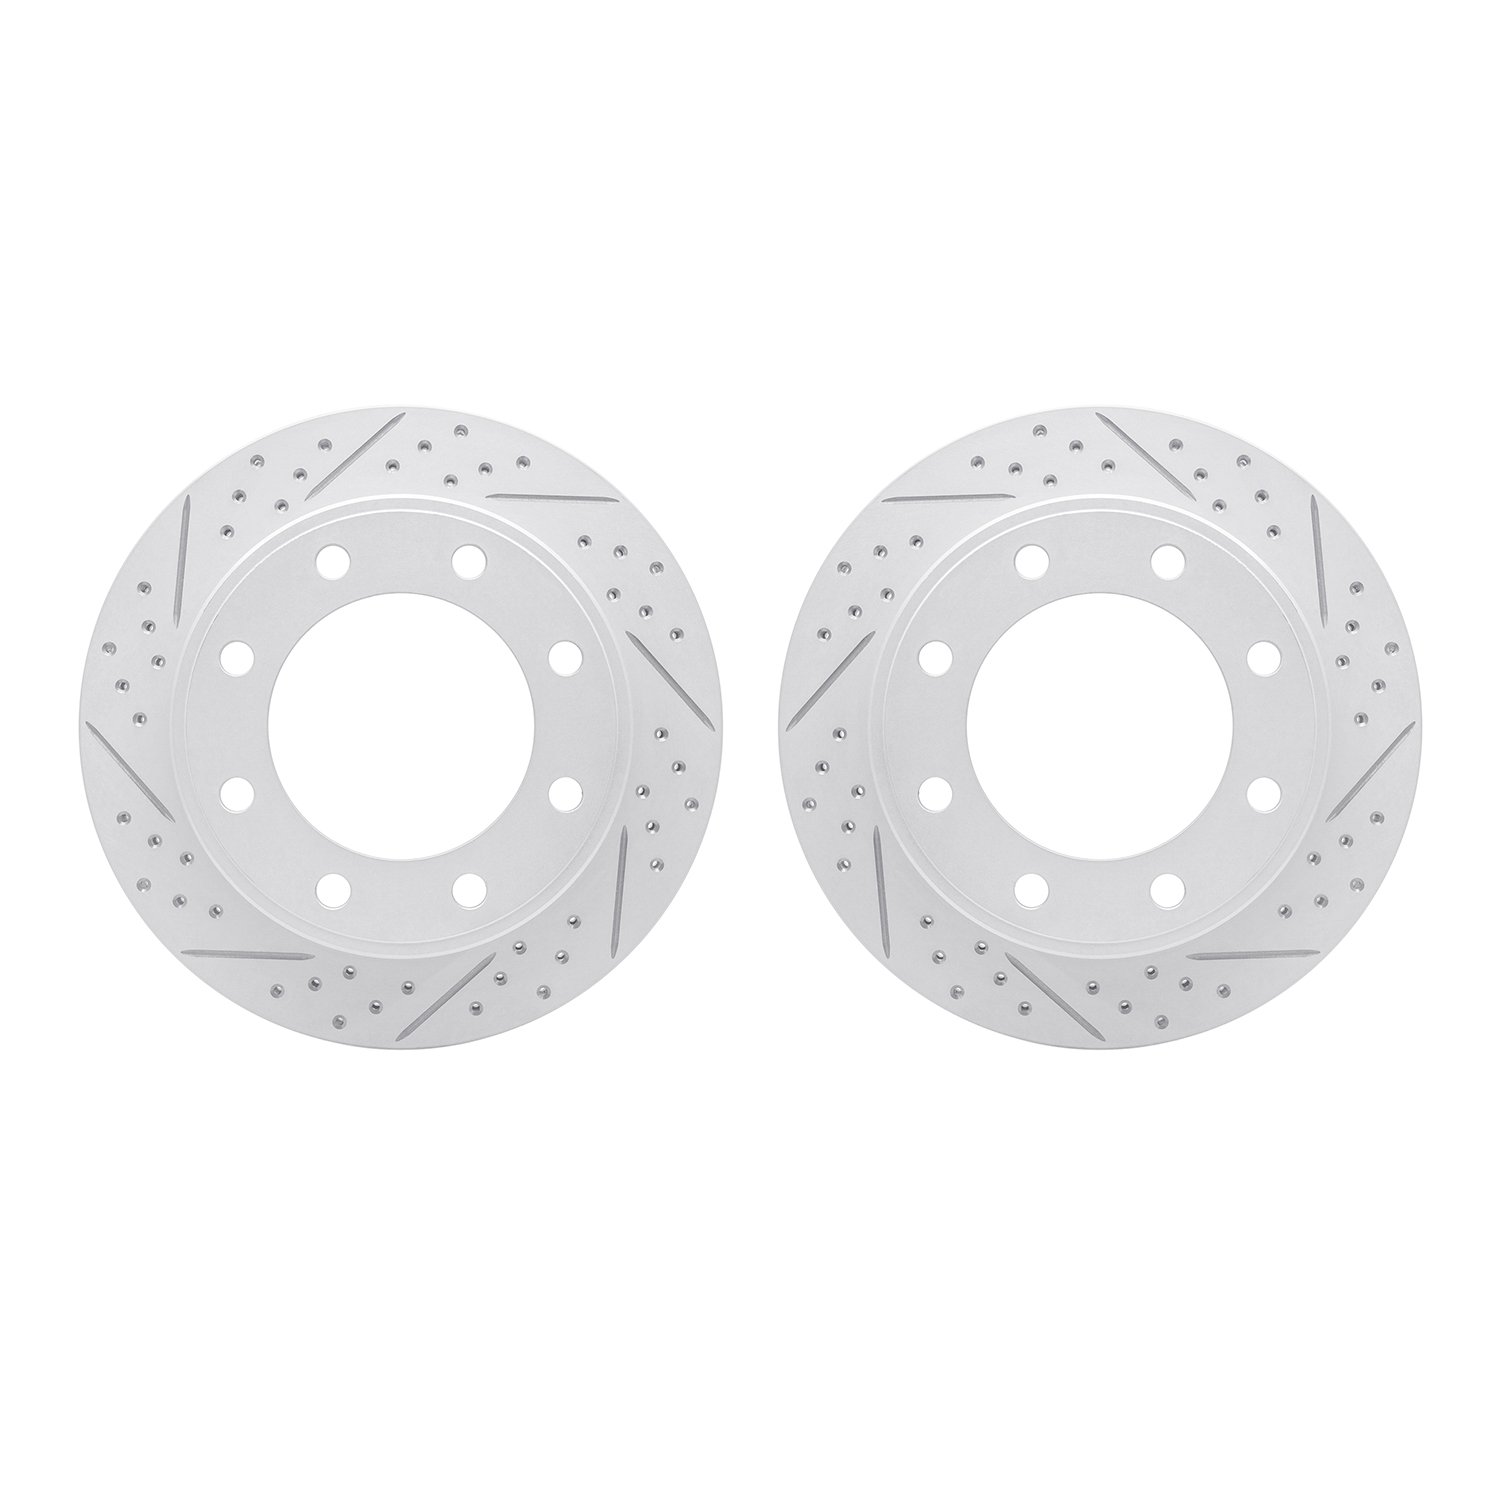 2002-54135 Geoperformance Drilled/Slotted Brake Rotors, 1999-2005 Ford/Lincoln/Mercury/Mazda, Position: Rear